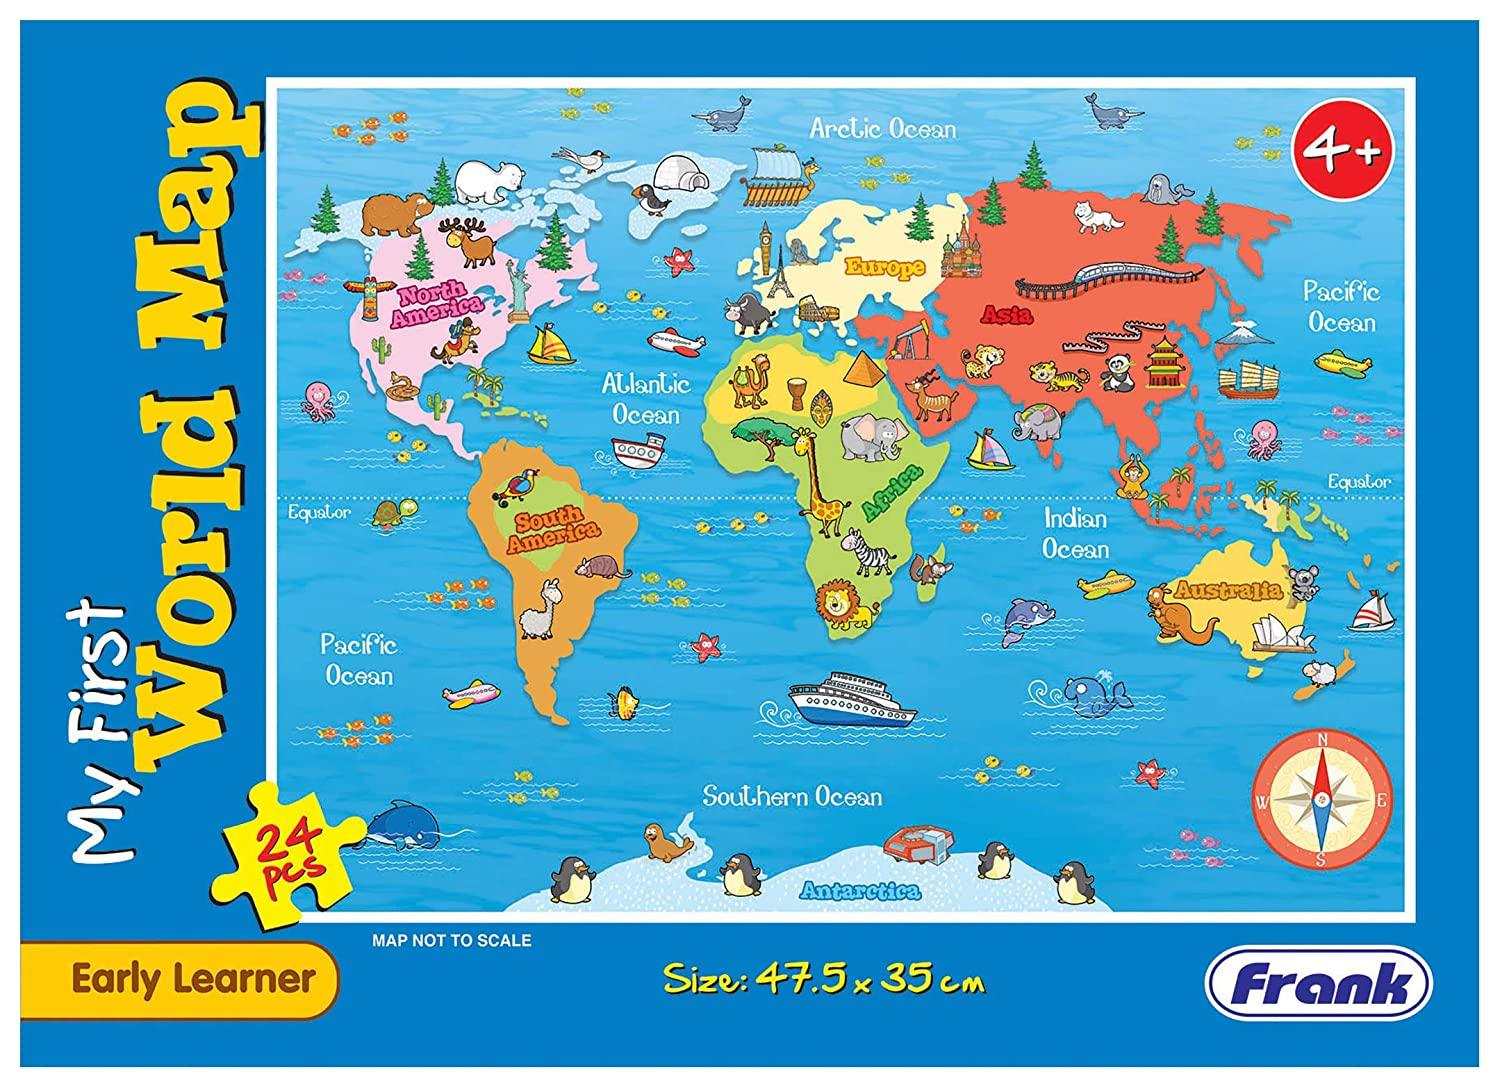 Frank My First World Map Puzzle - Early Learner Large Educational Jigsaw Puzzle with Continents, Oceans, Animals for Ages 4 & Above